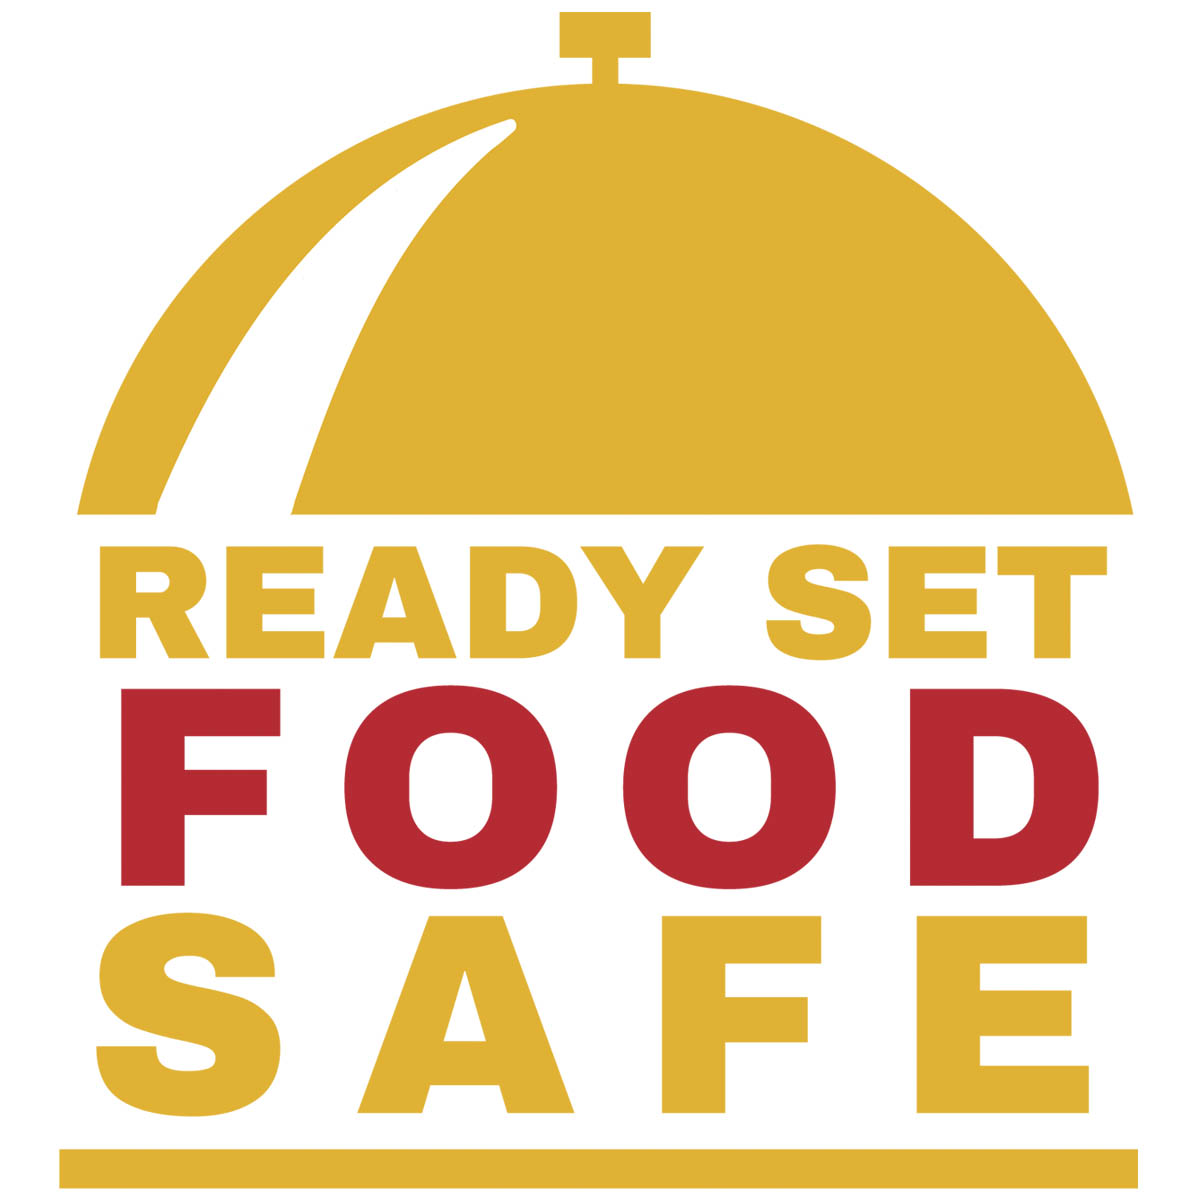 Food Safety Label. Food Safety Red Band Sign. Food Safety Royalty Free SVG,  Cliparts, Vectors, and Stock Illustration. Image 130071376.